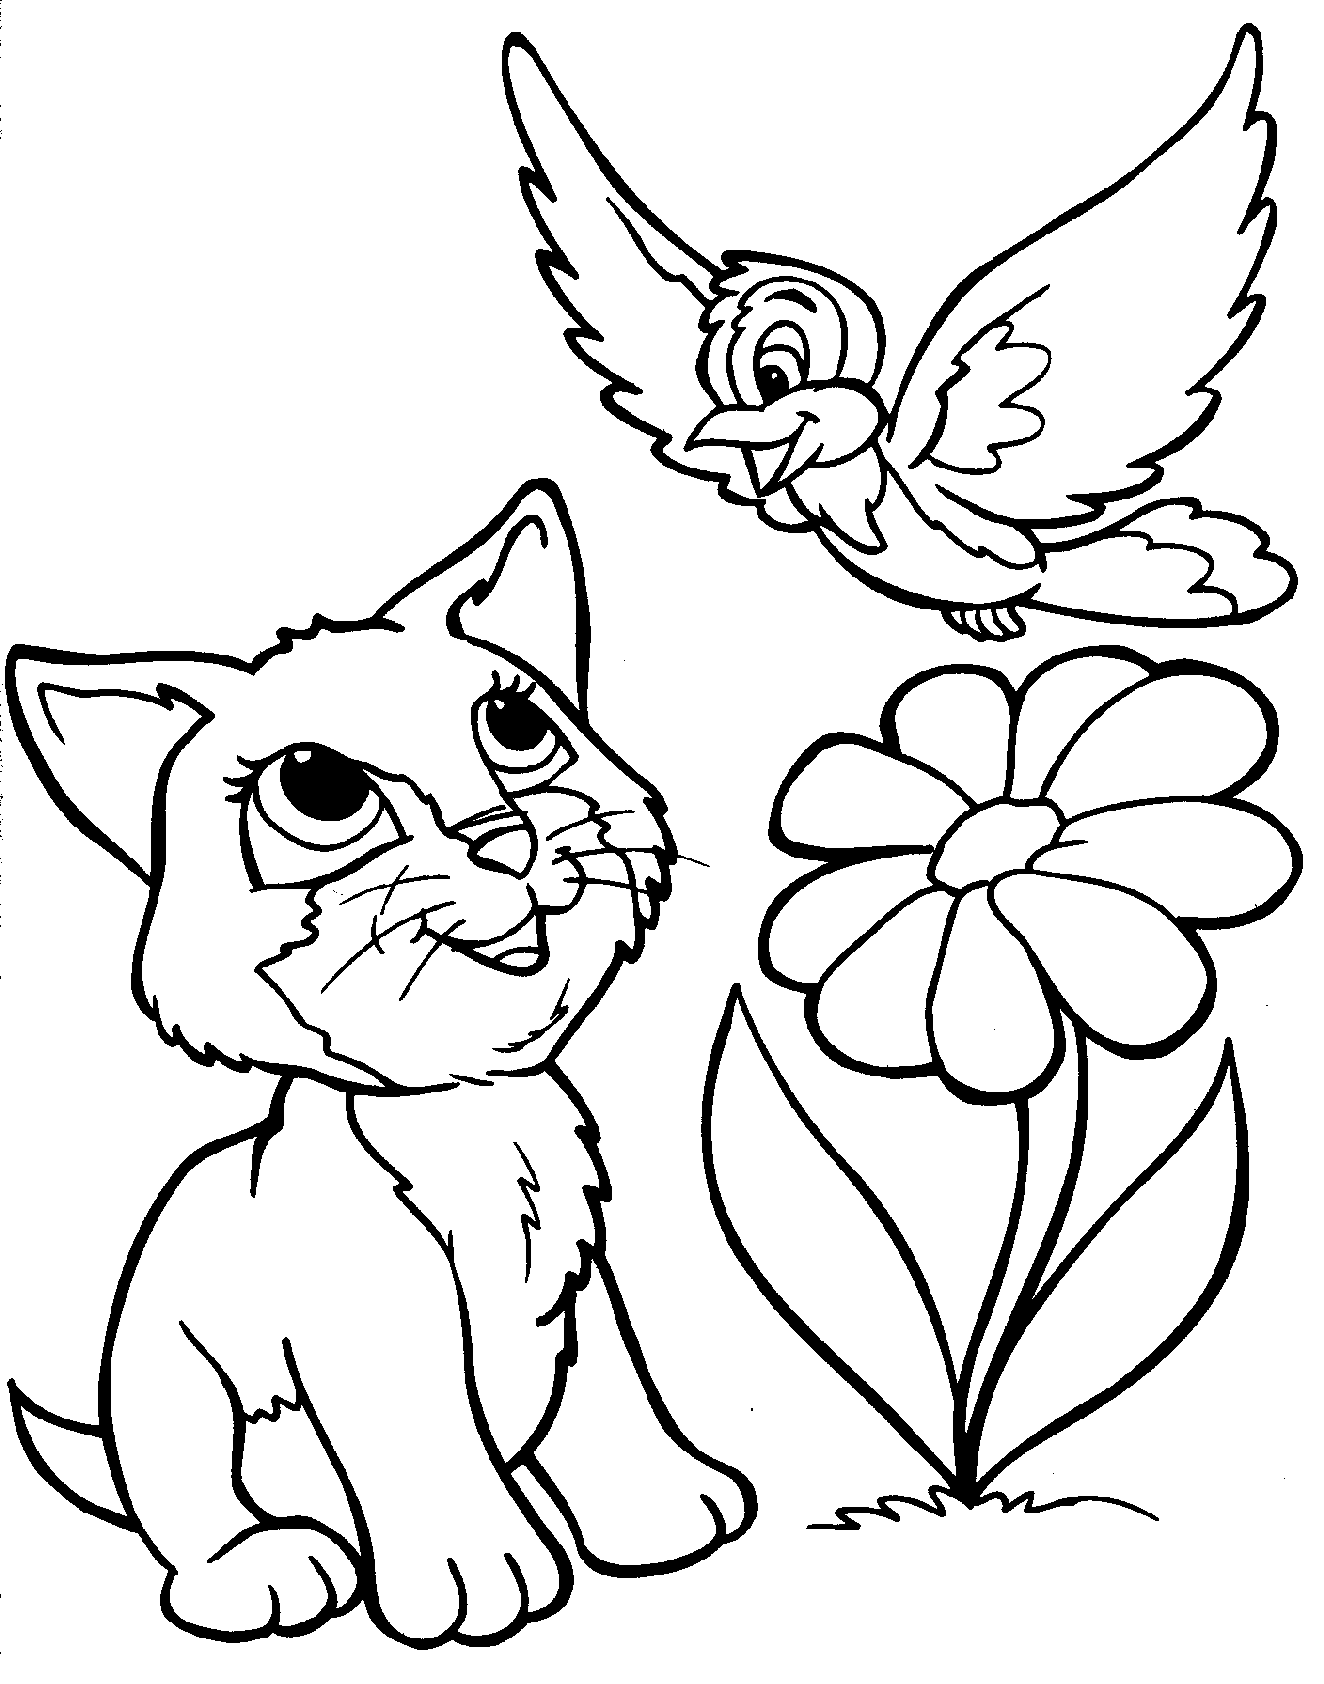 kitten color pages kitten coloring pages to download and print for free kitten color pages 